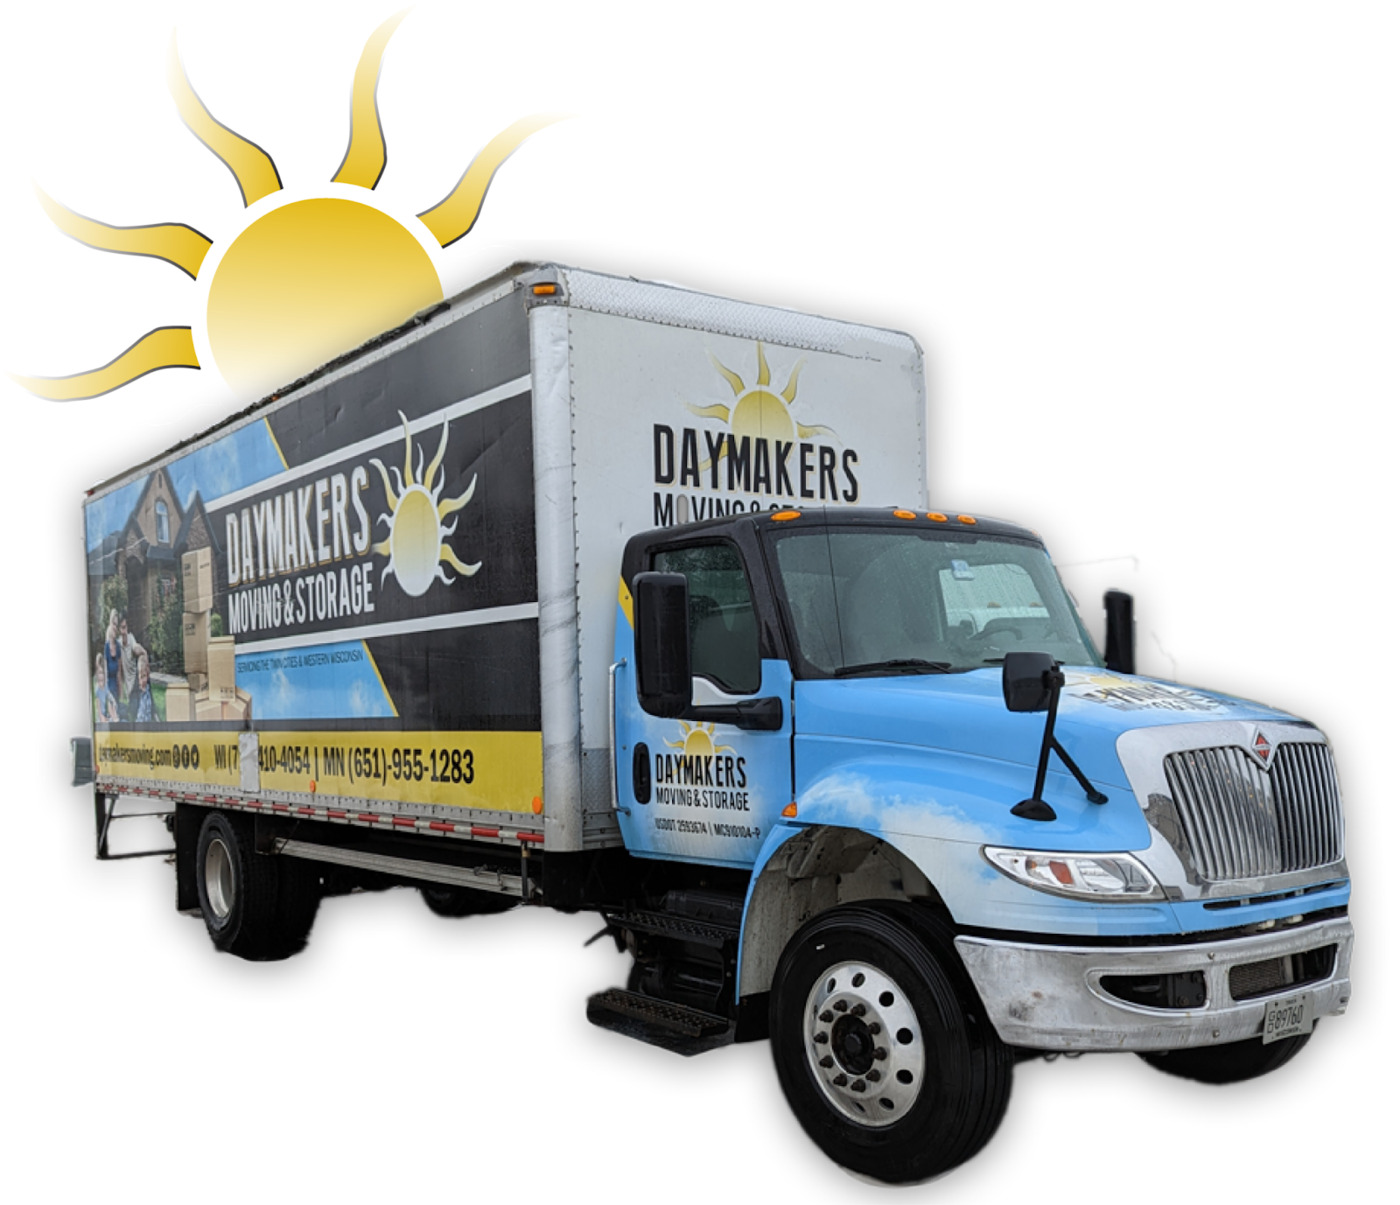 Daymakers Moving & Storage is a leading moving company offering a wide range of services, including local and long-distance moving, packing, and storage solutions.